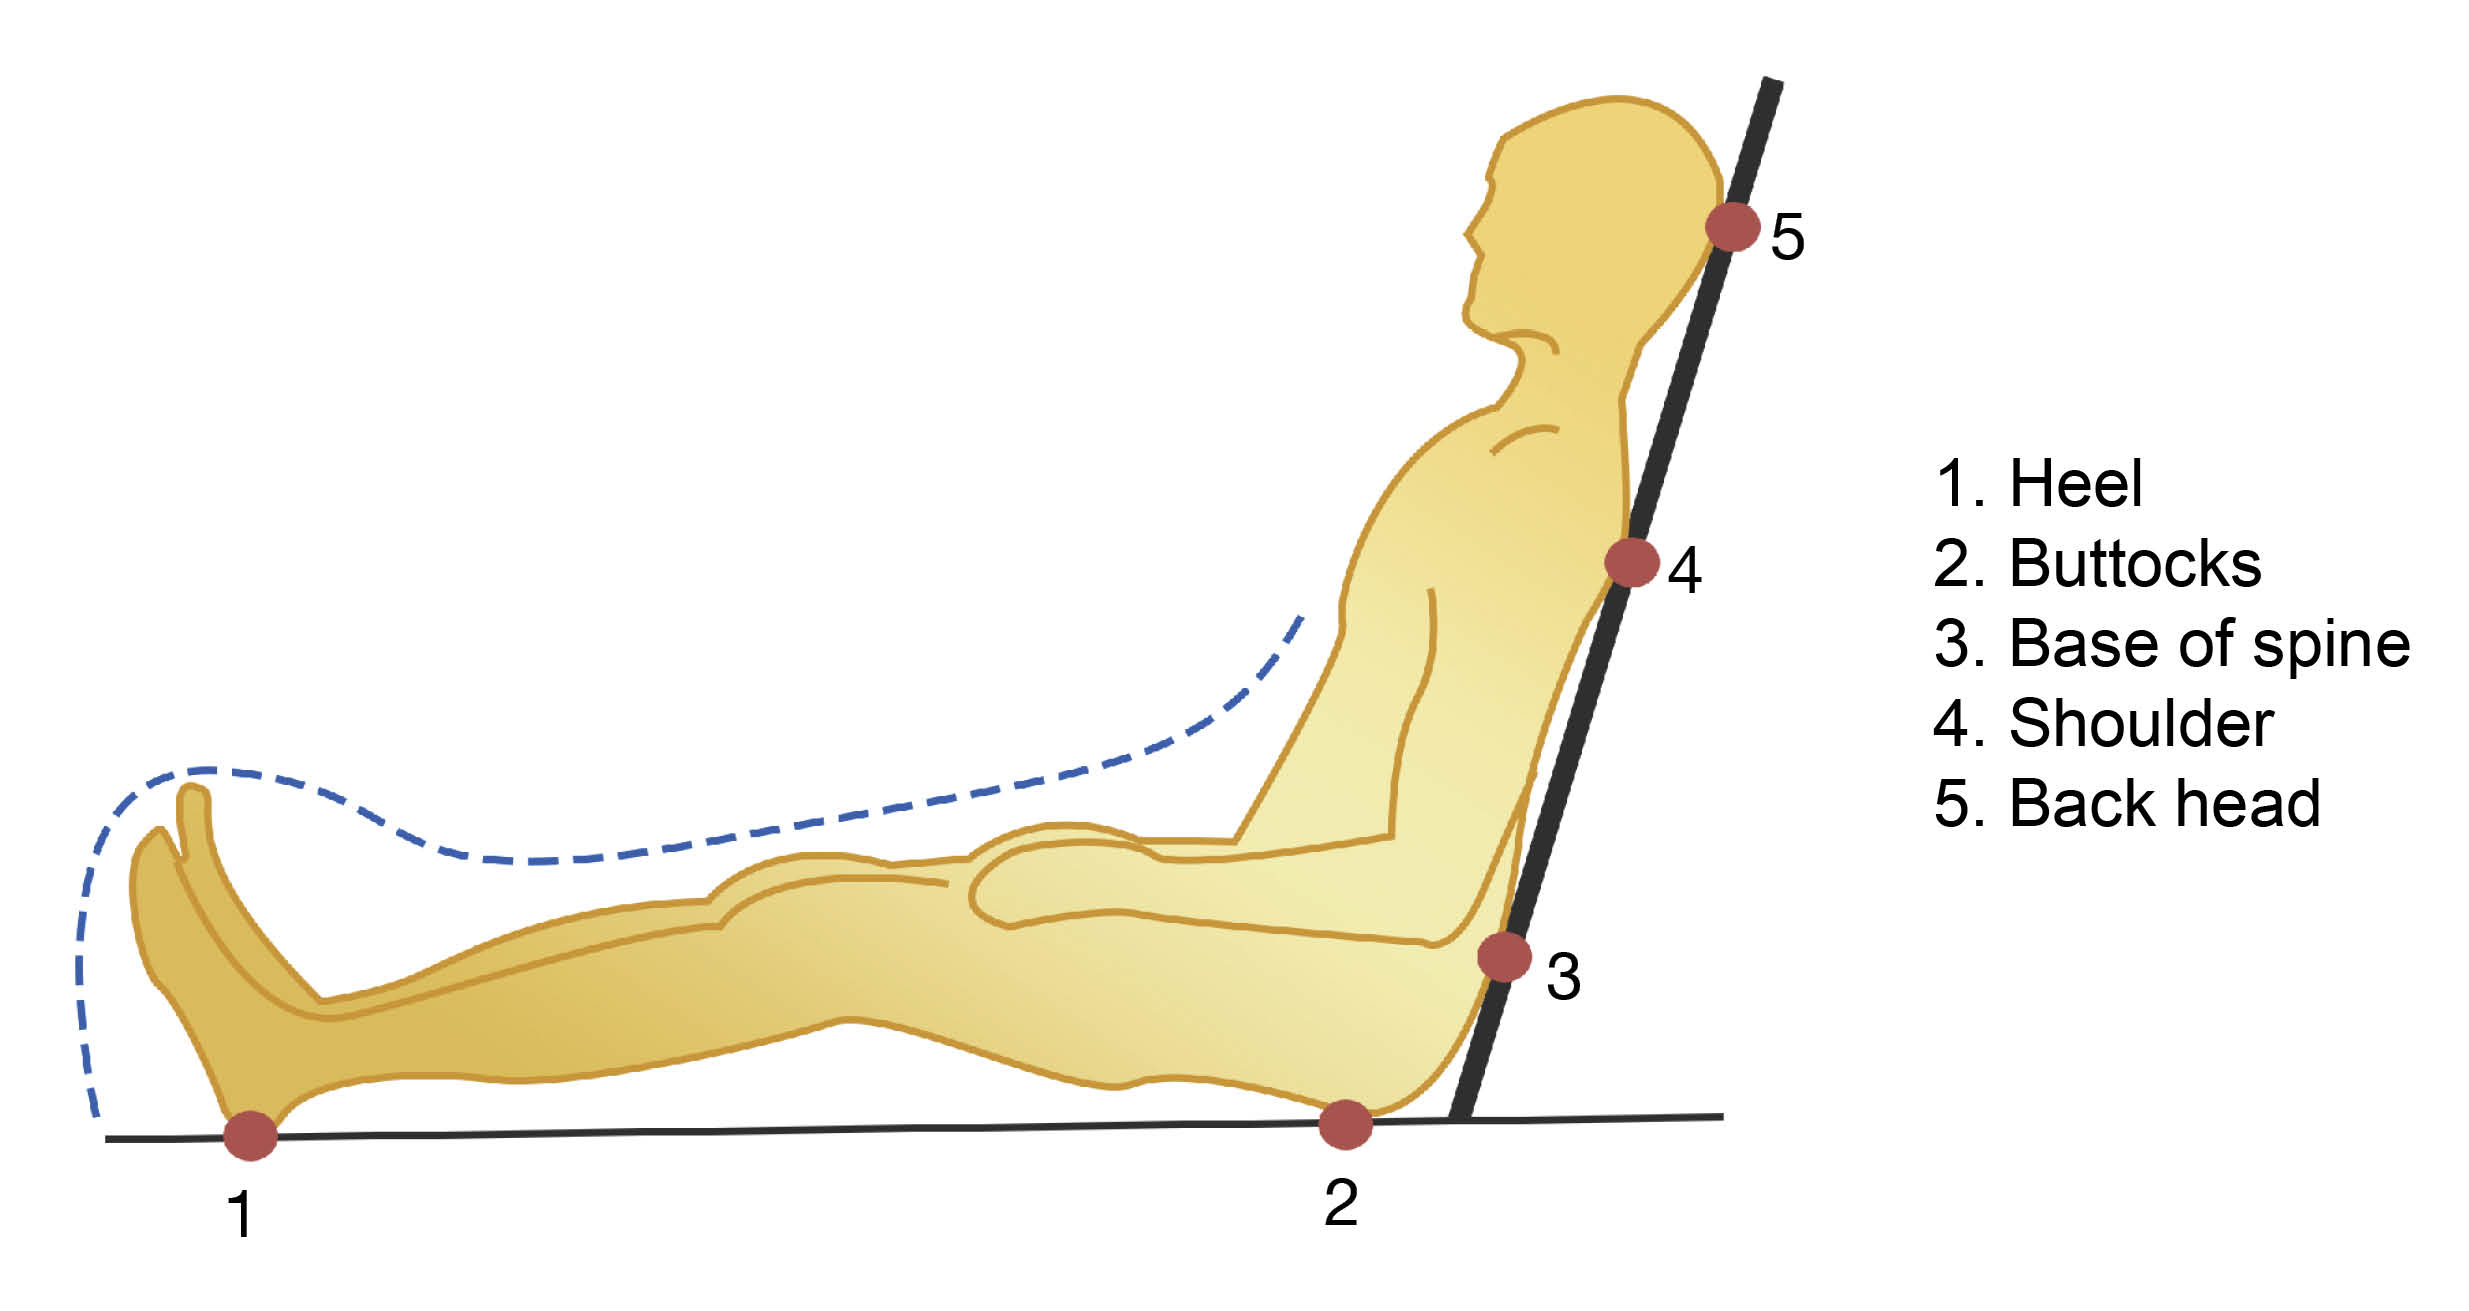 When sitting, the points on the body where a patient is at risk of developing a pressure ulcer